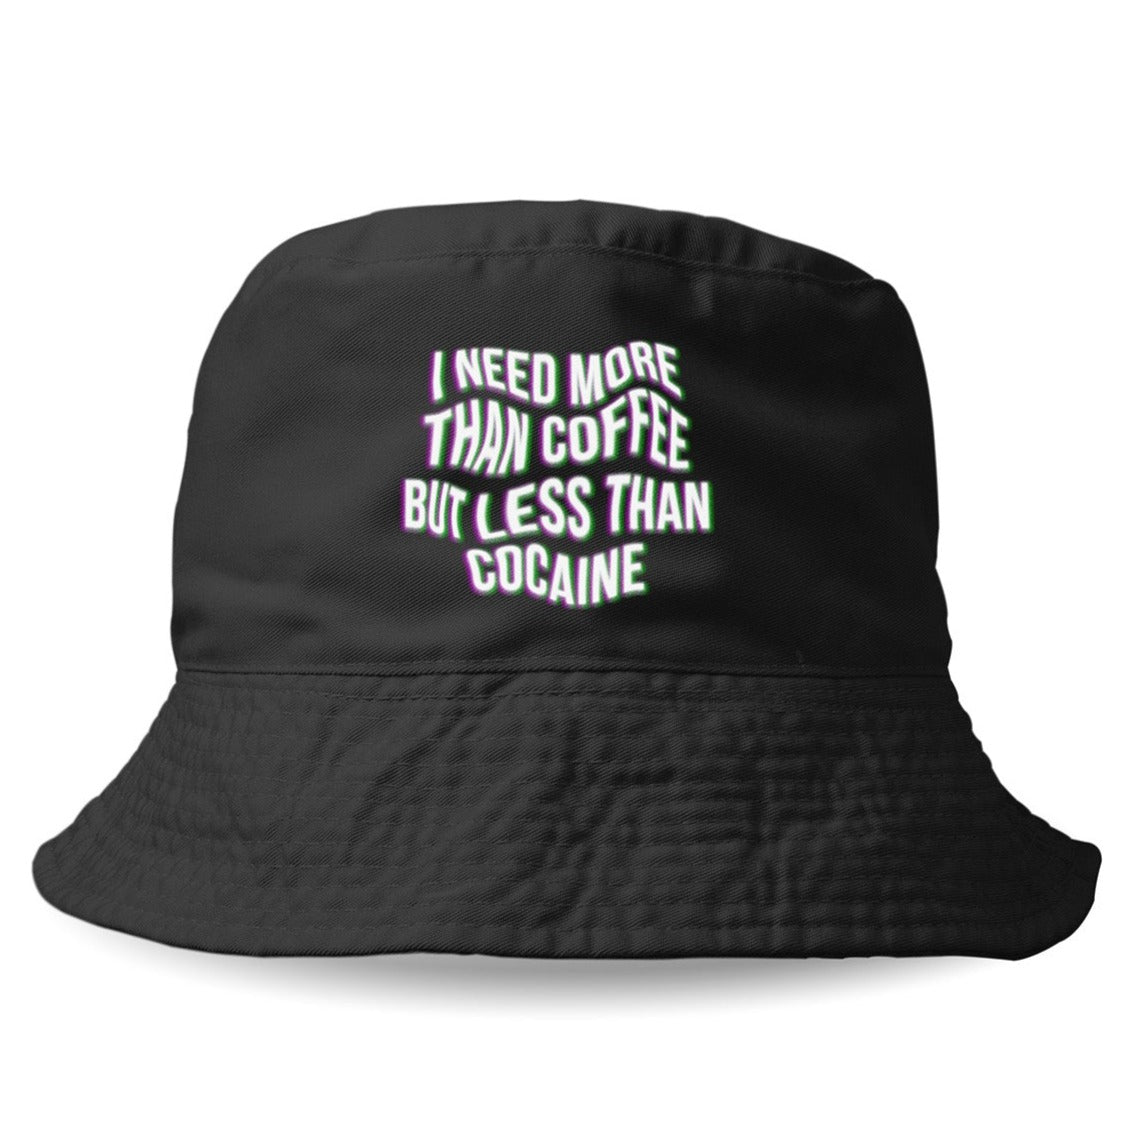 MORE THAN COFFEE - Bucket Hat